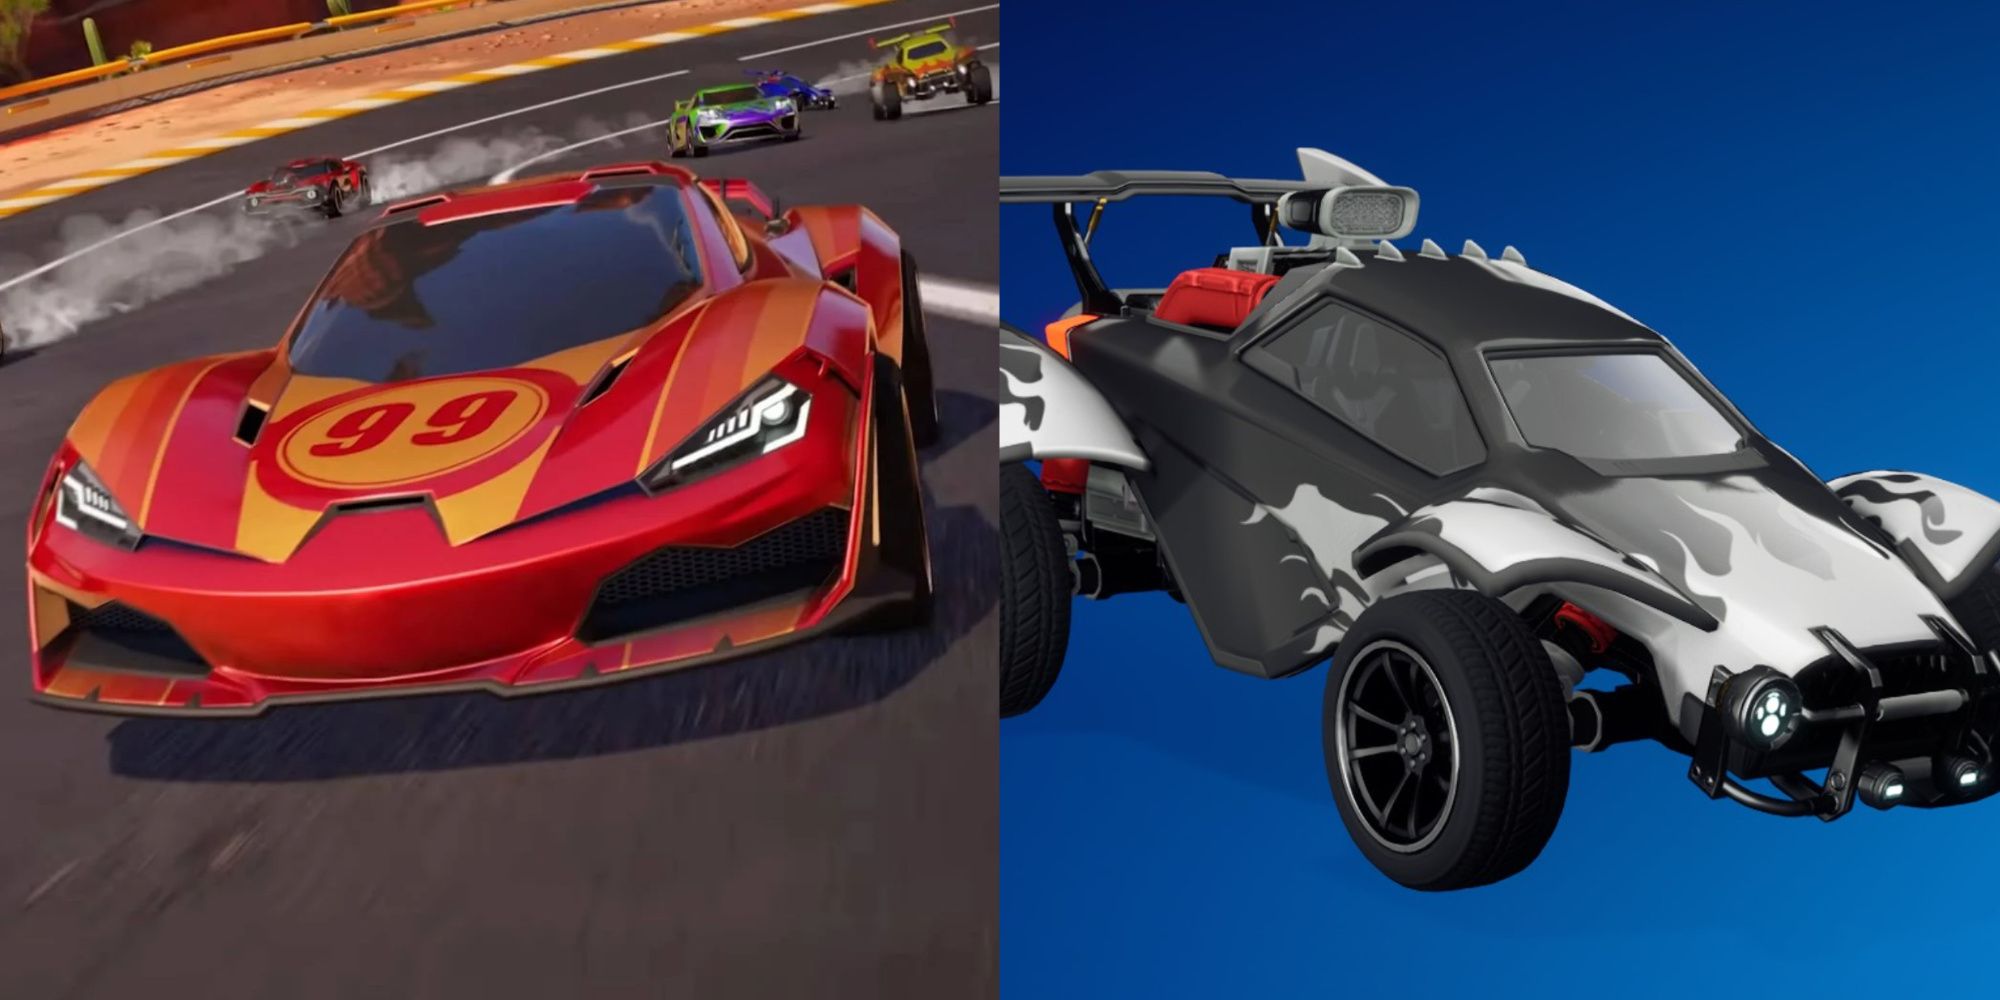 A split image featuring two cars from Fortnite Rocket Racing, showcasing two different decal styles.